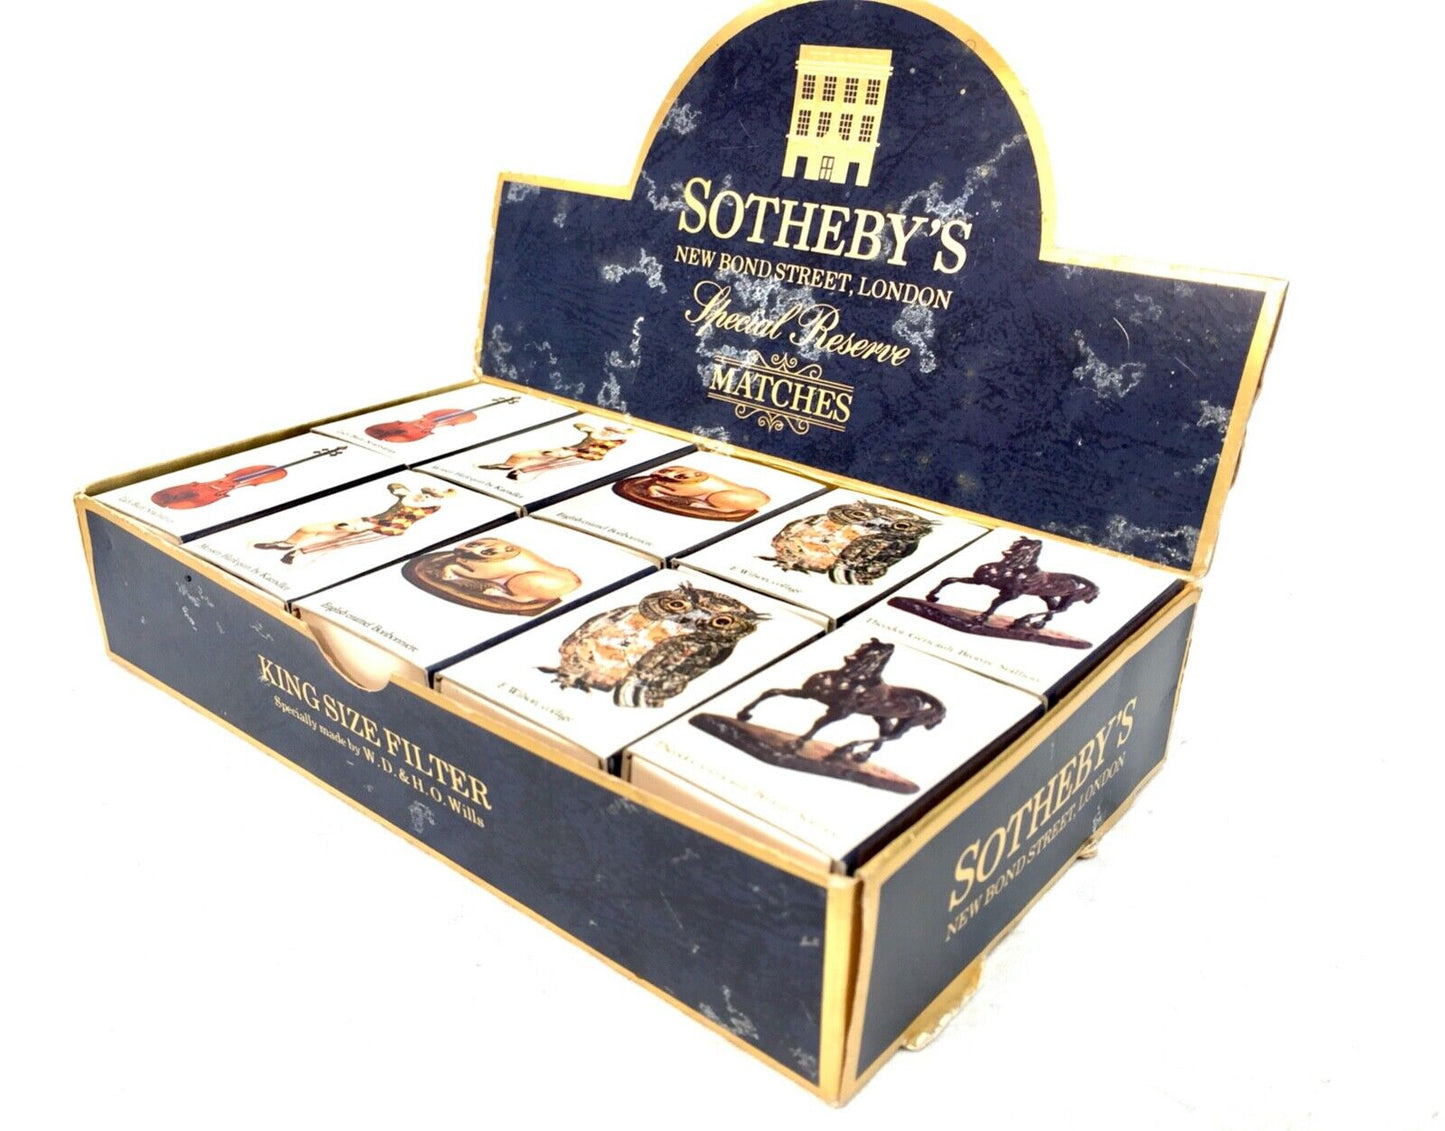 Vintage Sotheby’s Advertising Matches / Match Box Collection / Full Set of 30